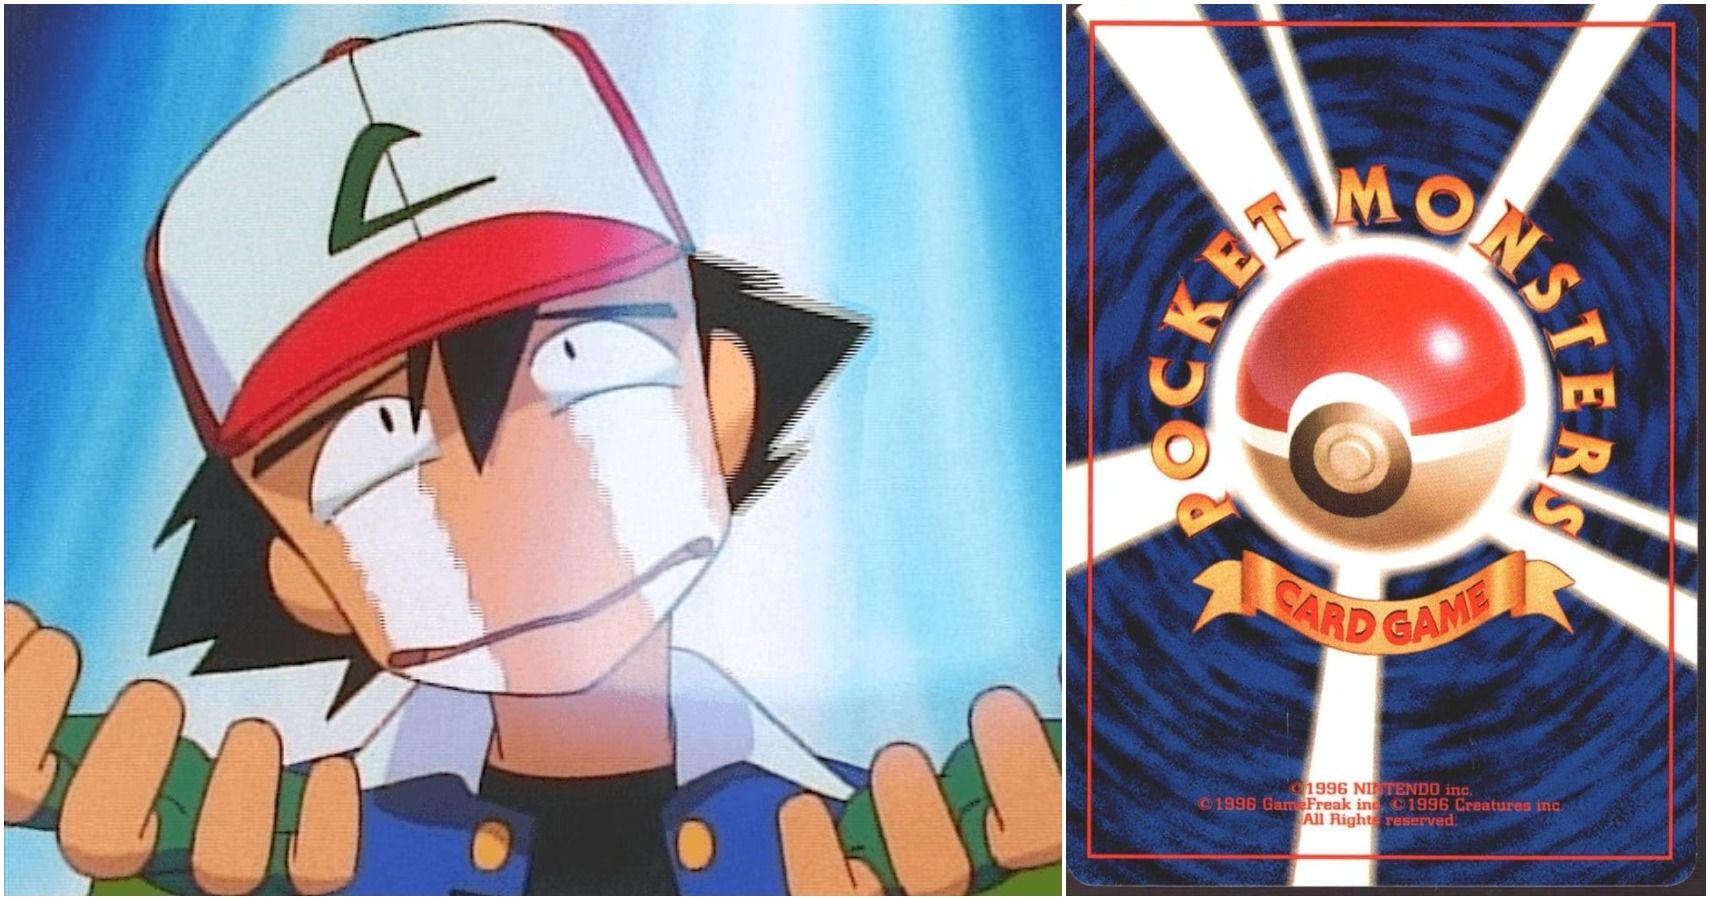 The 10 Most Obscure Pokemon Cards You'll Never Own